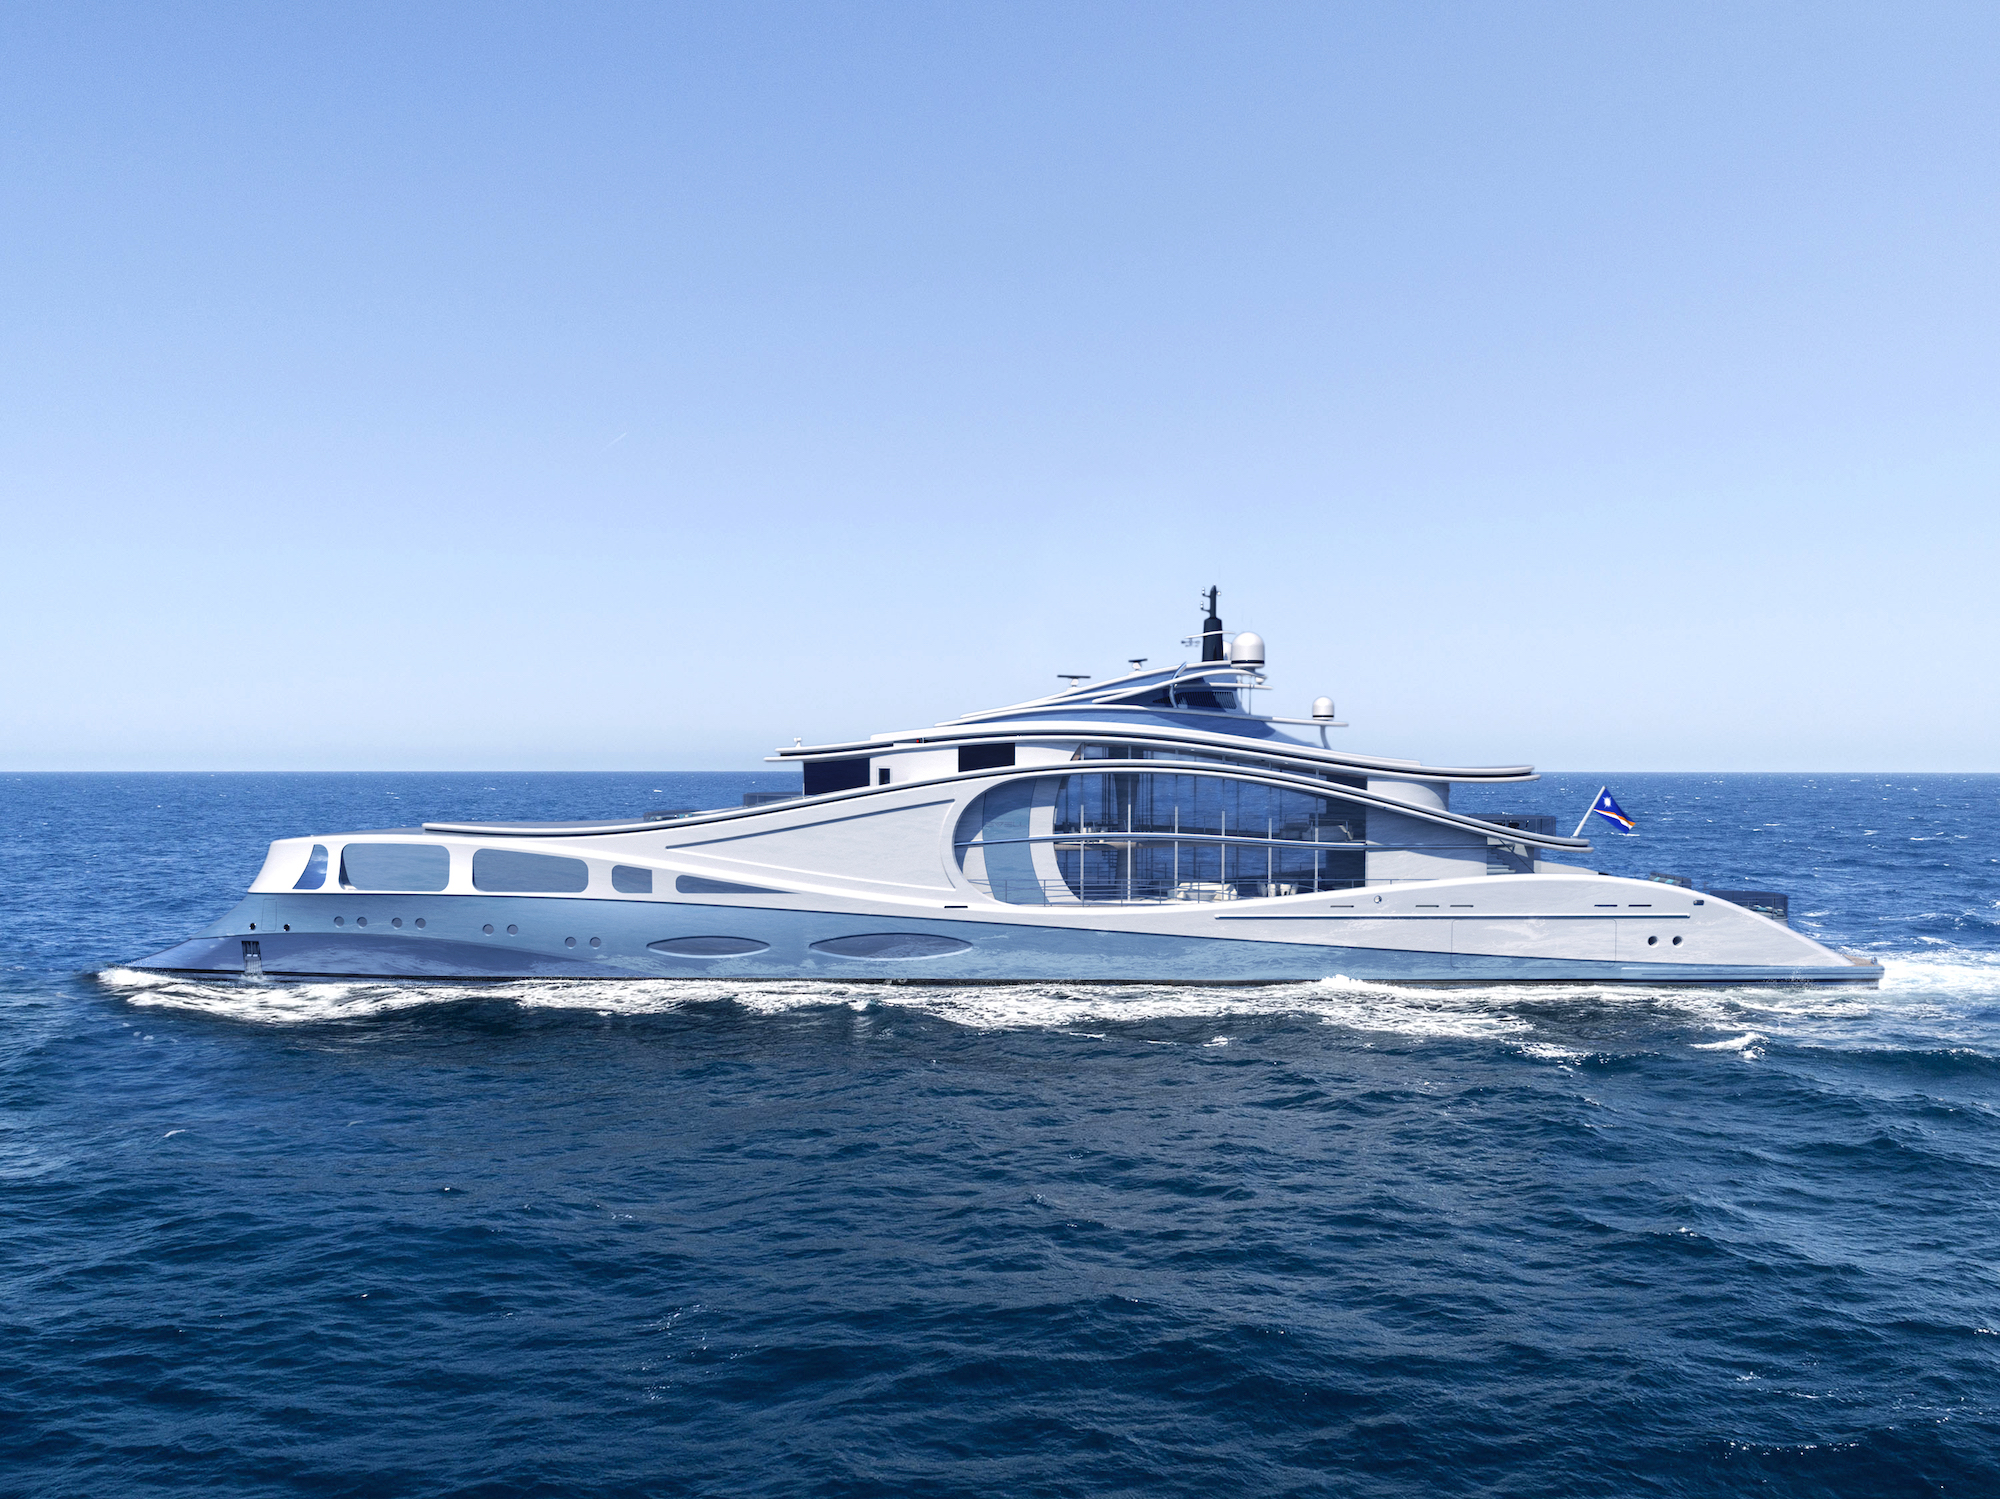 The 252-foot superyacht Swell was designed by Anthony Glasson with flowing, minimalist lines - Effect Magazine